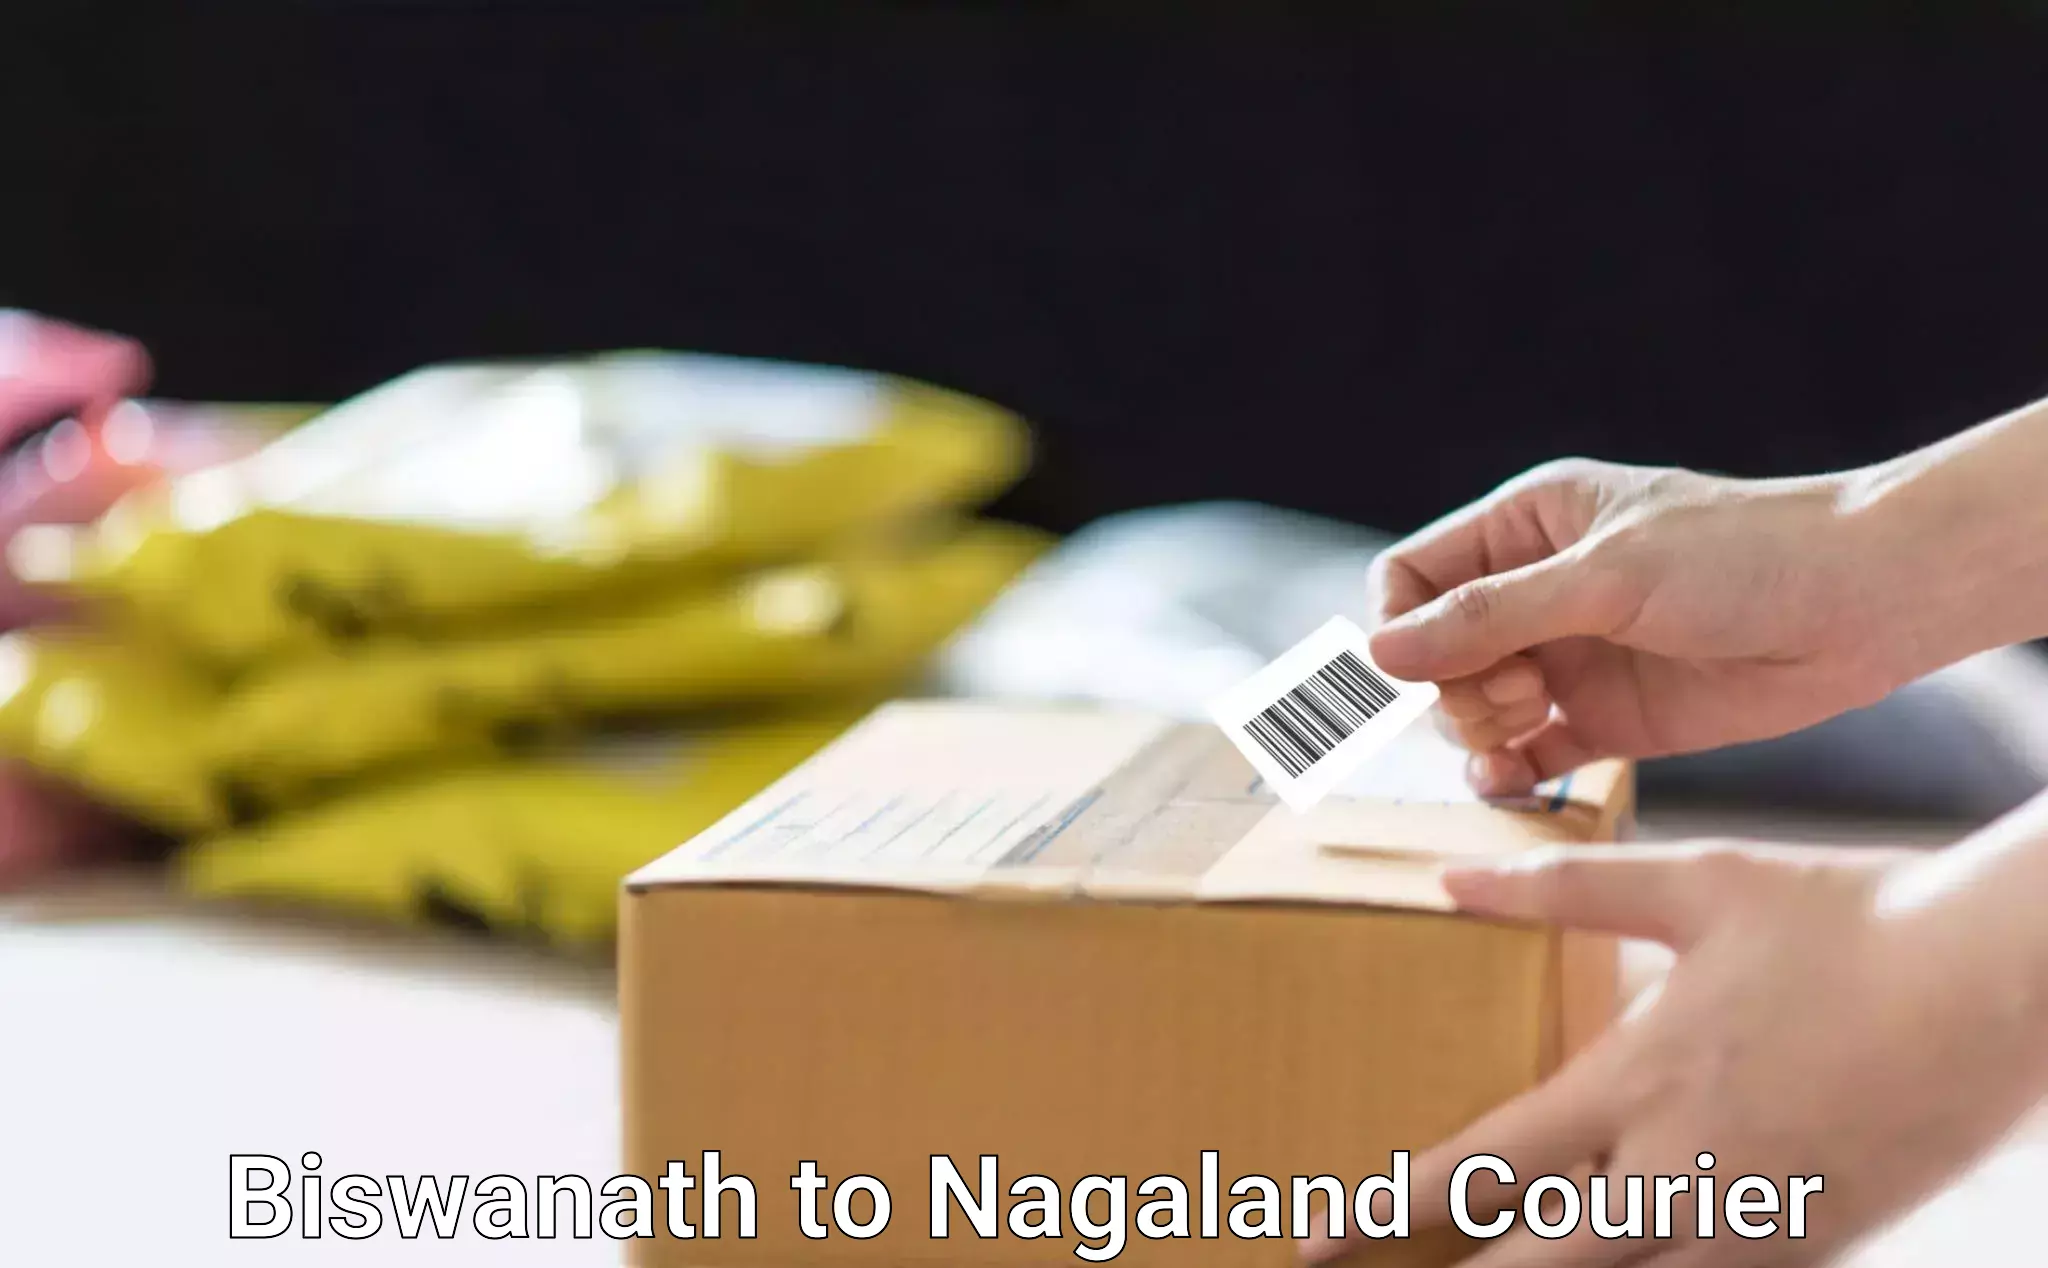 Global delivery options Biswanath to Nagaland